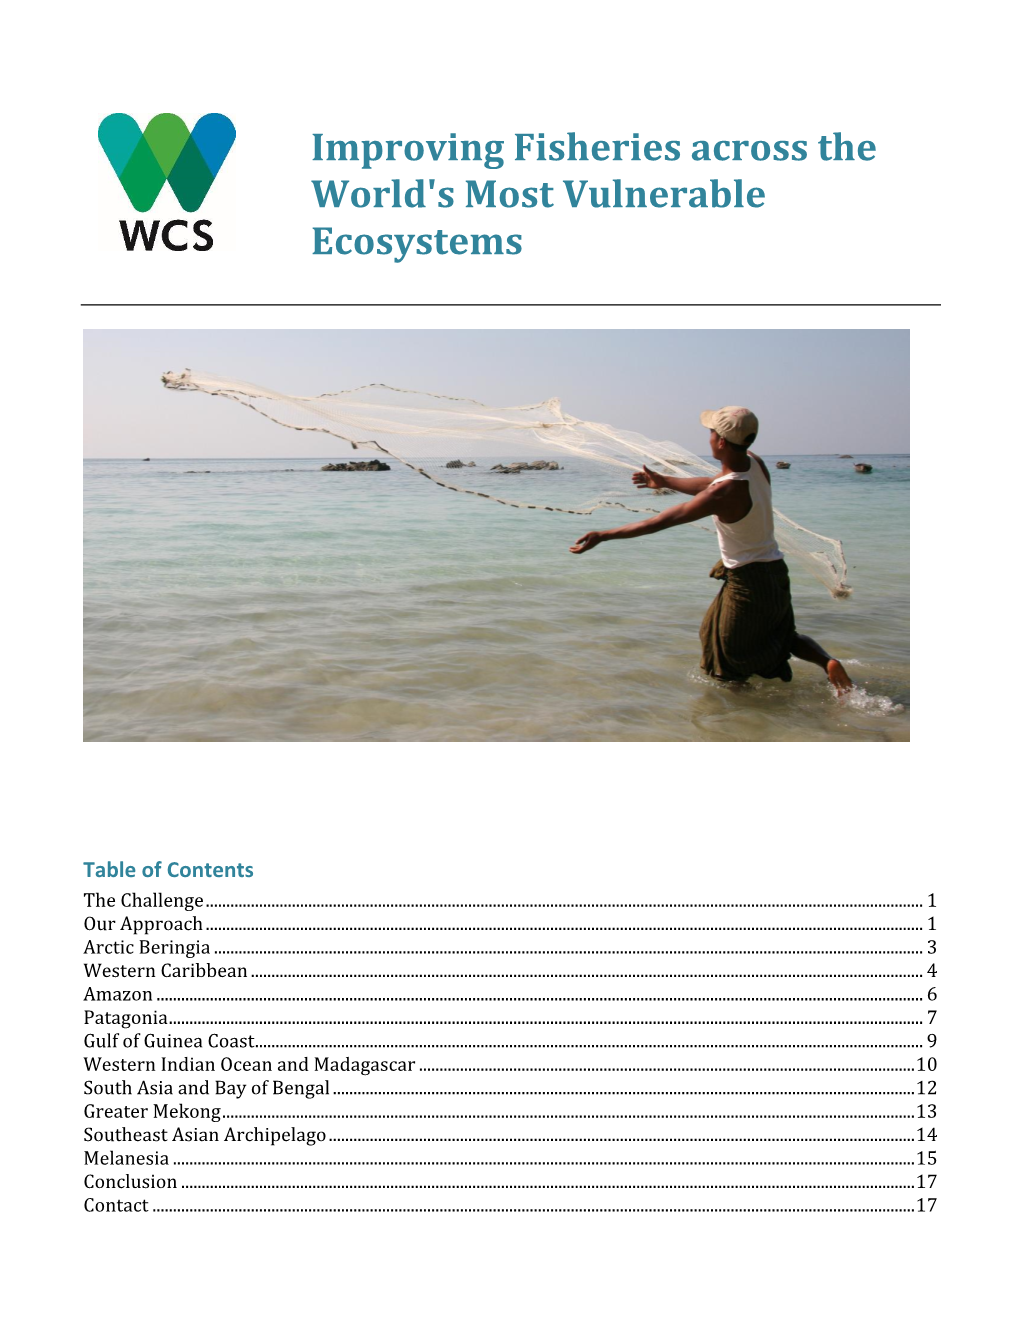 Improving Fisheries Across the World's Most Vulnerable Ecosystems